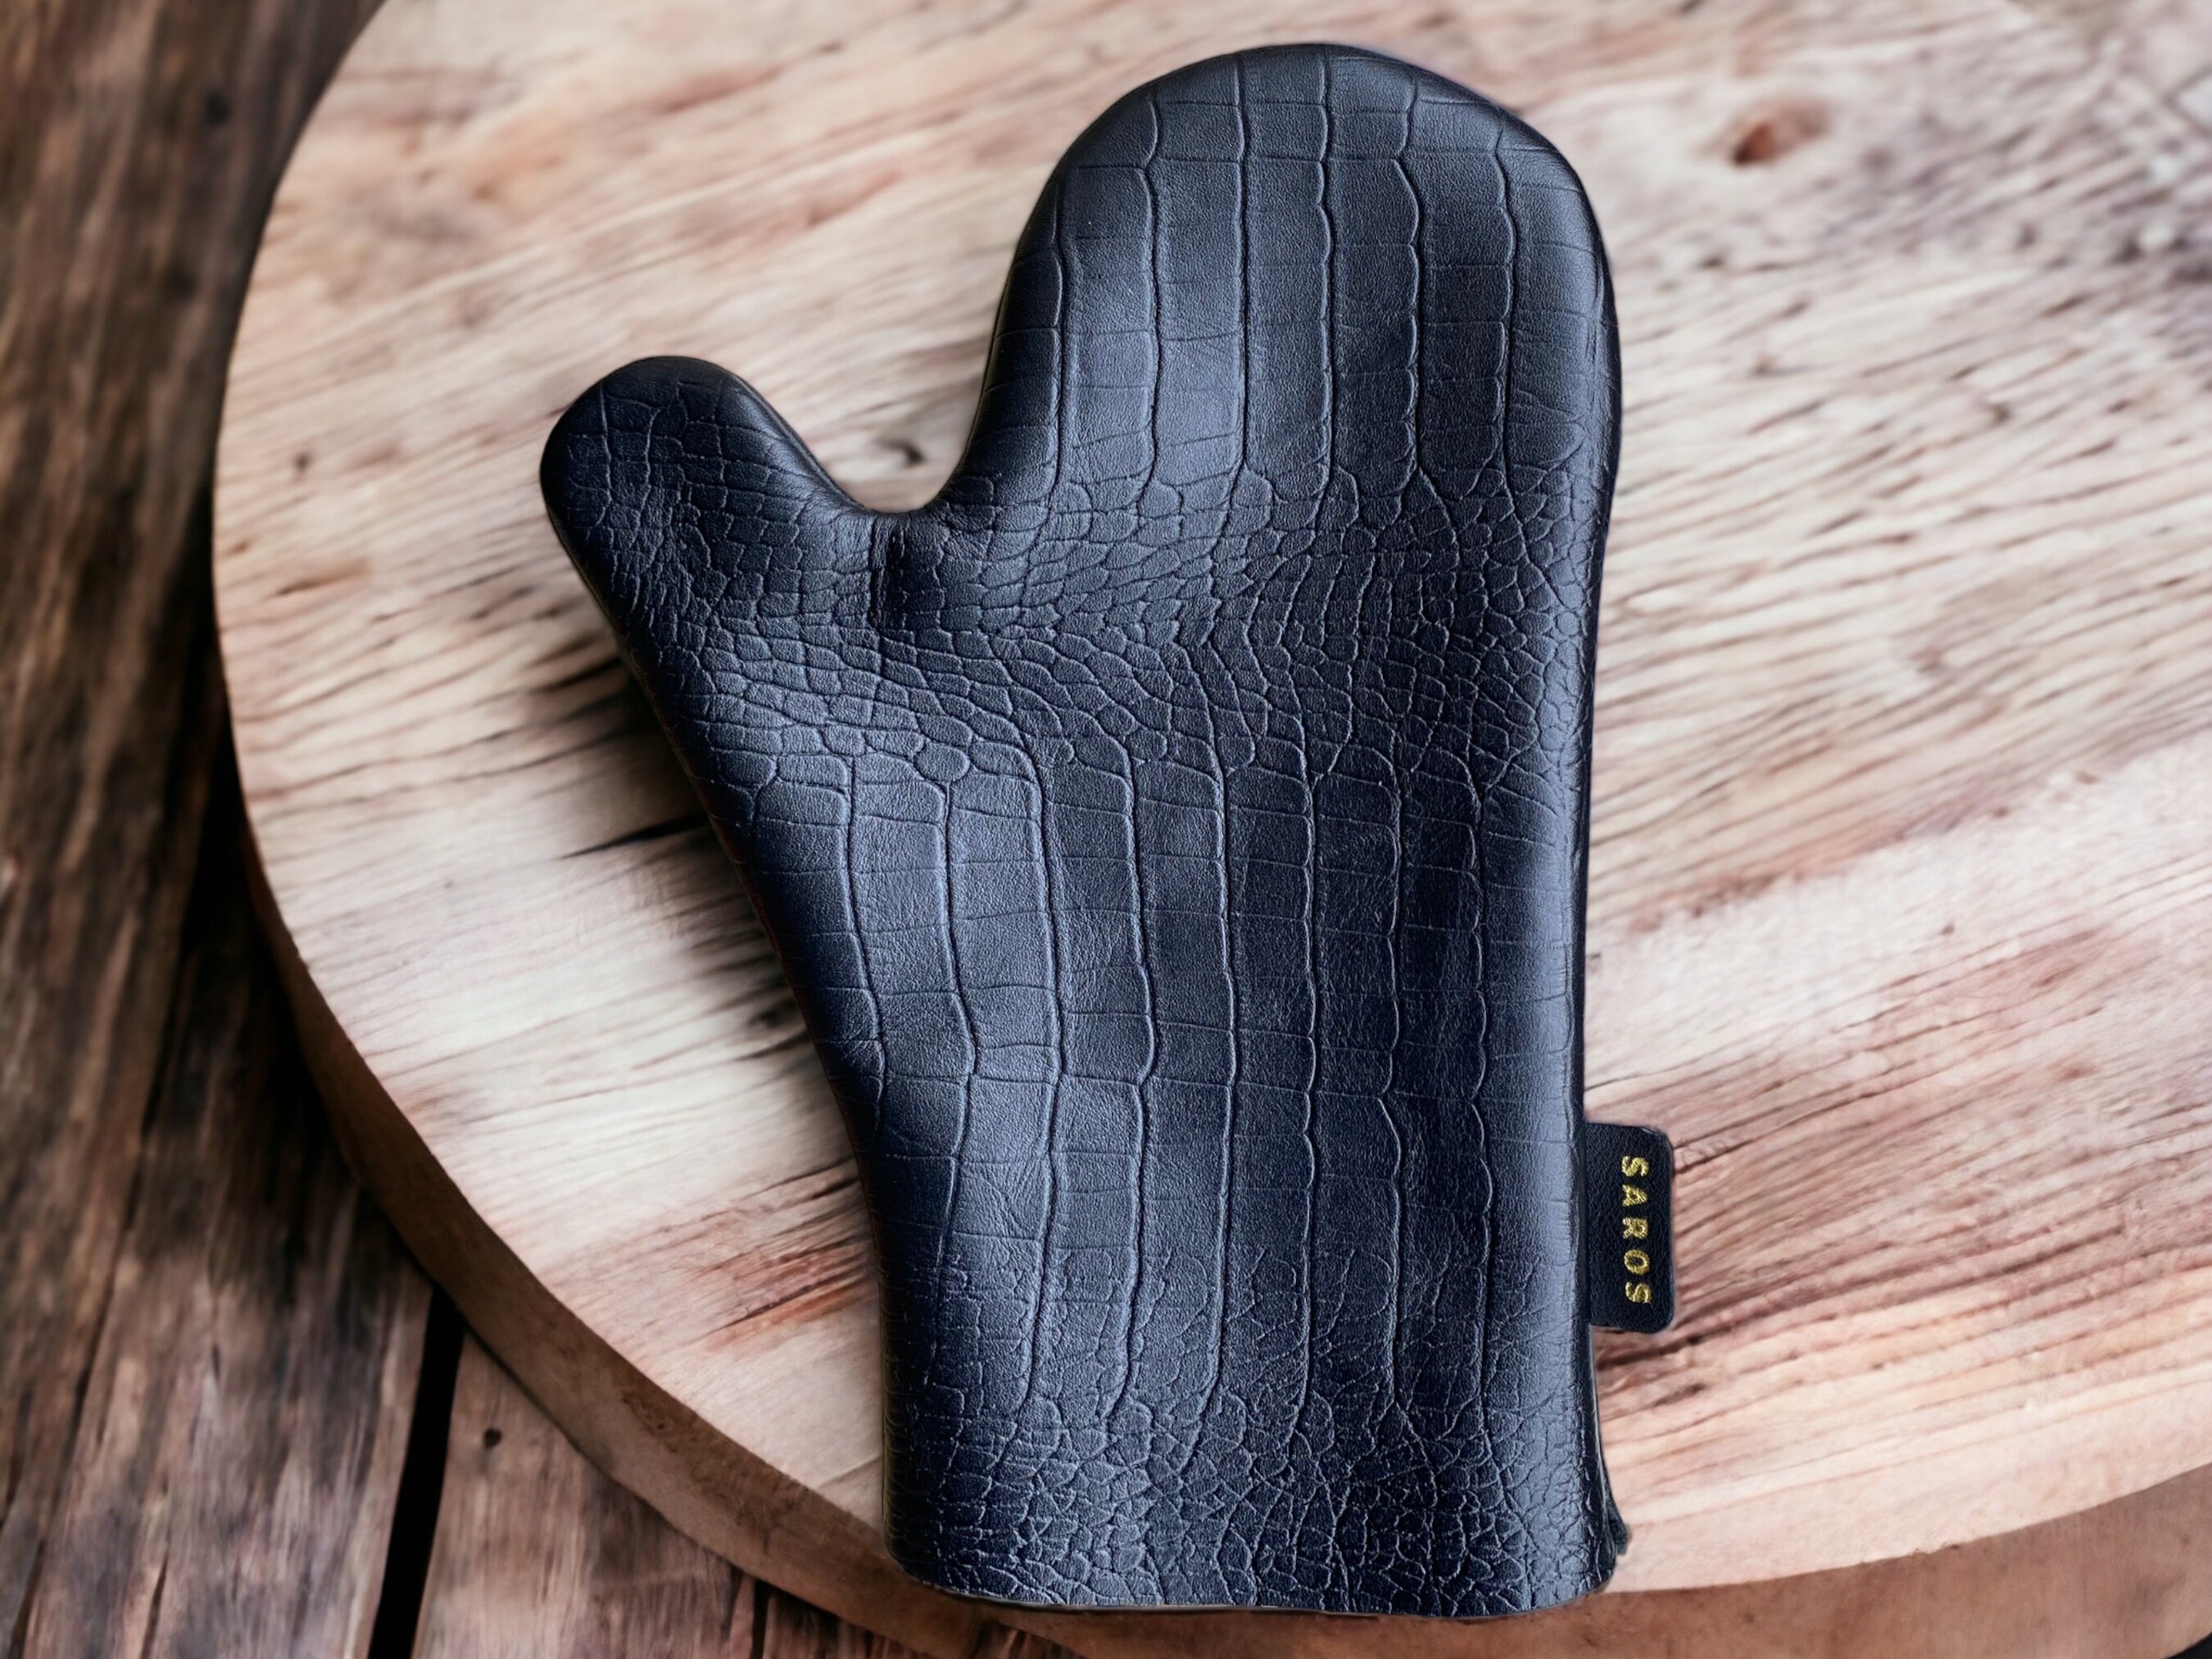 The Organic Company Oven Mitts Pair - Black Large